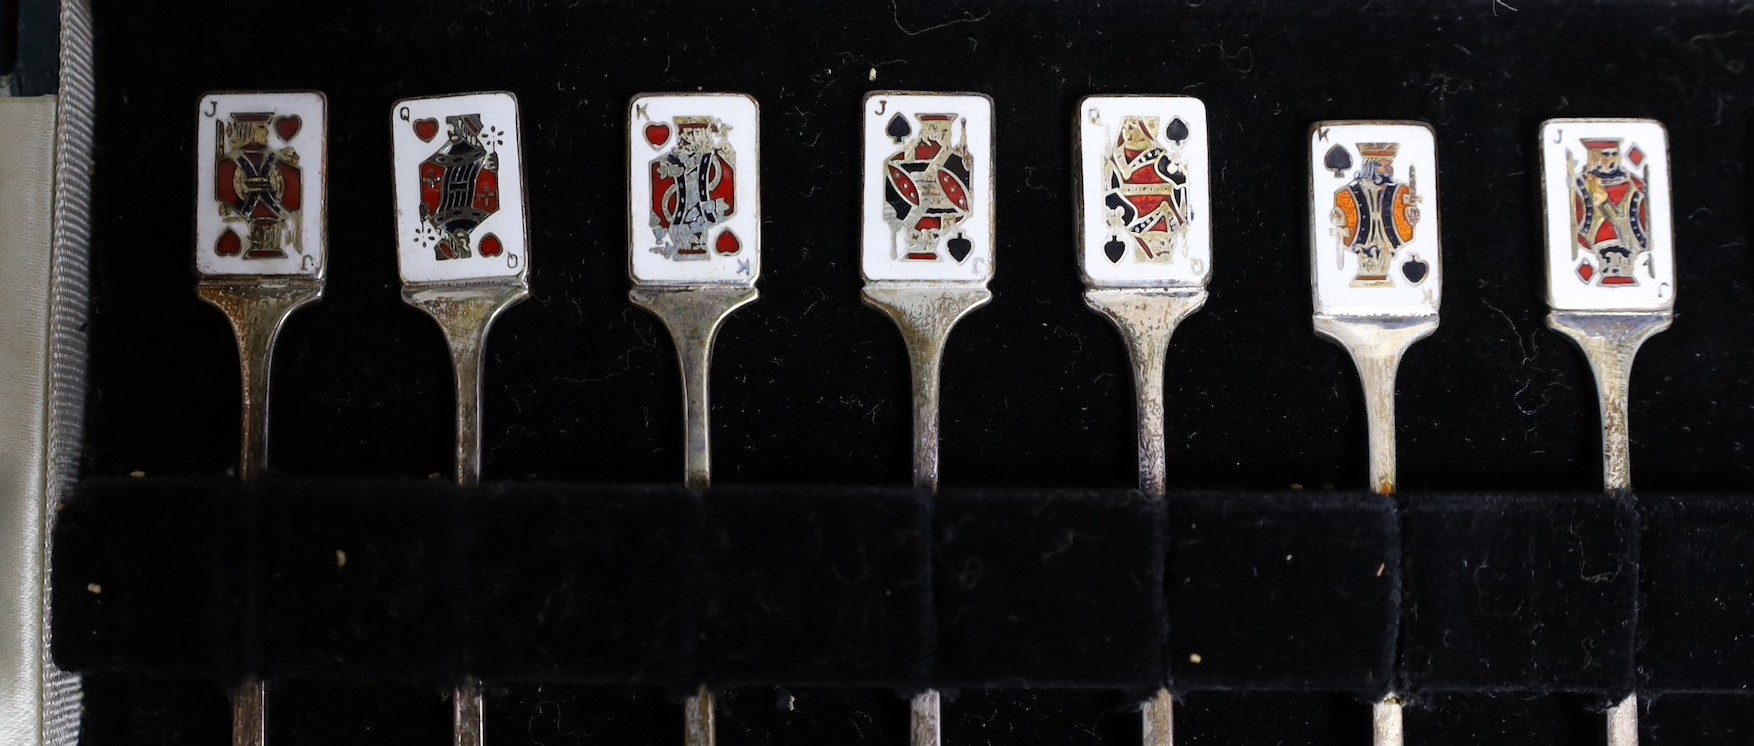 A cased set of twelve early 1960's silver and enamel cocktail sticks, by Garrard & Co, with playing card terminals, Birmingham, 1961.